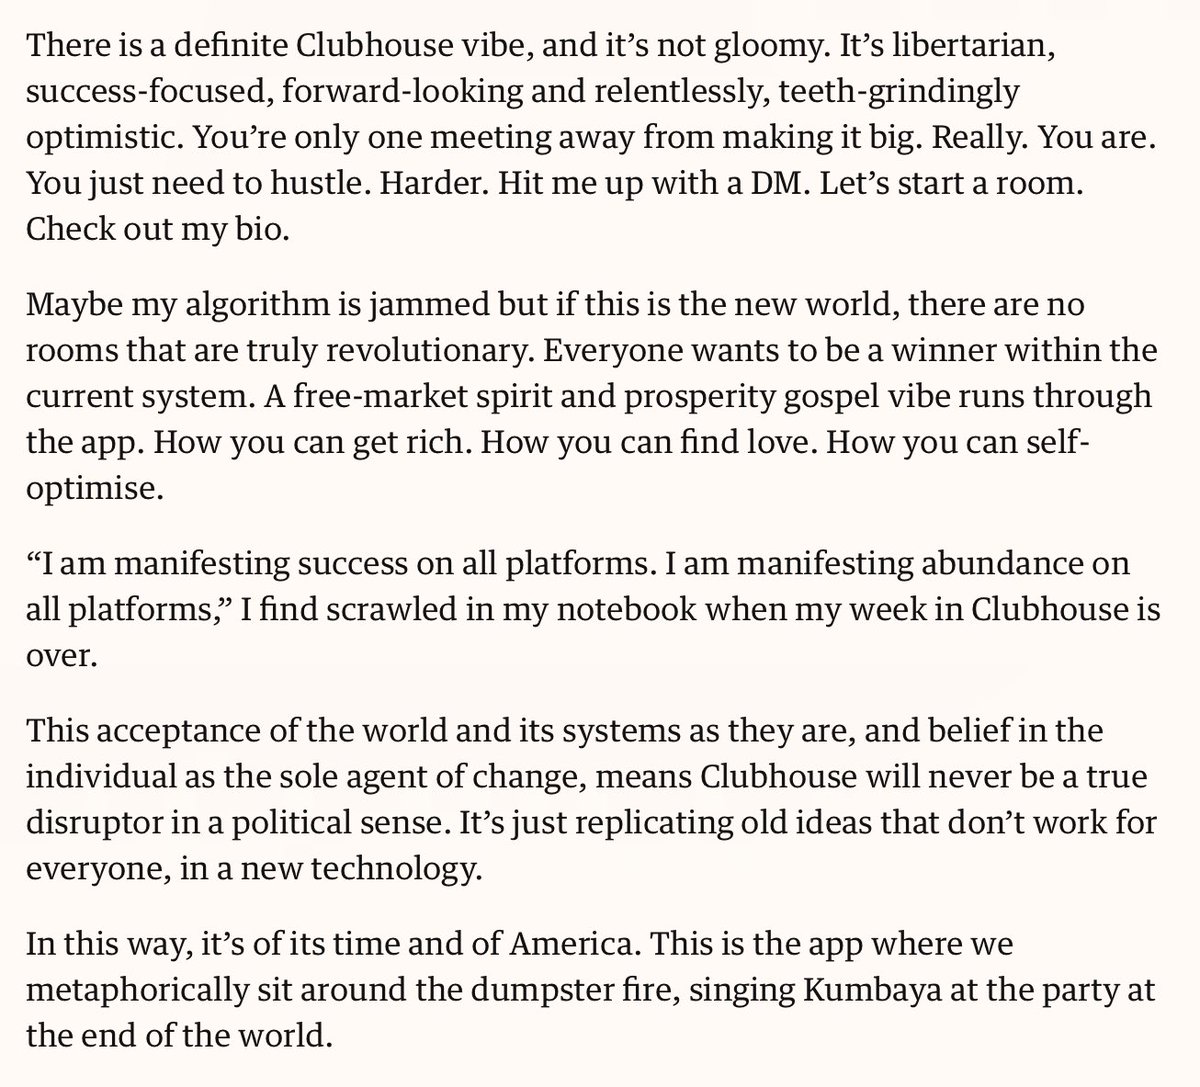 My strange week on Clubhouse: sound baths, self-help and teeth-grinding optimism  https://www.theguardian.com/commentisfree/2021/feb/19/sound-baths-self-help-and-teeth-grinding-optimism-my-strange-disorienting-week-on-clubhouse Exactly. Thanks  @benleemusic